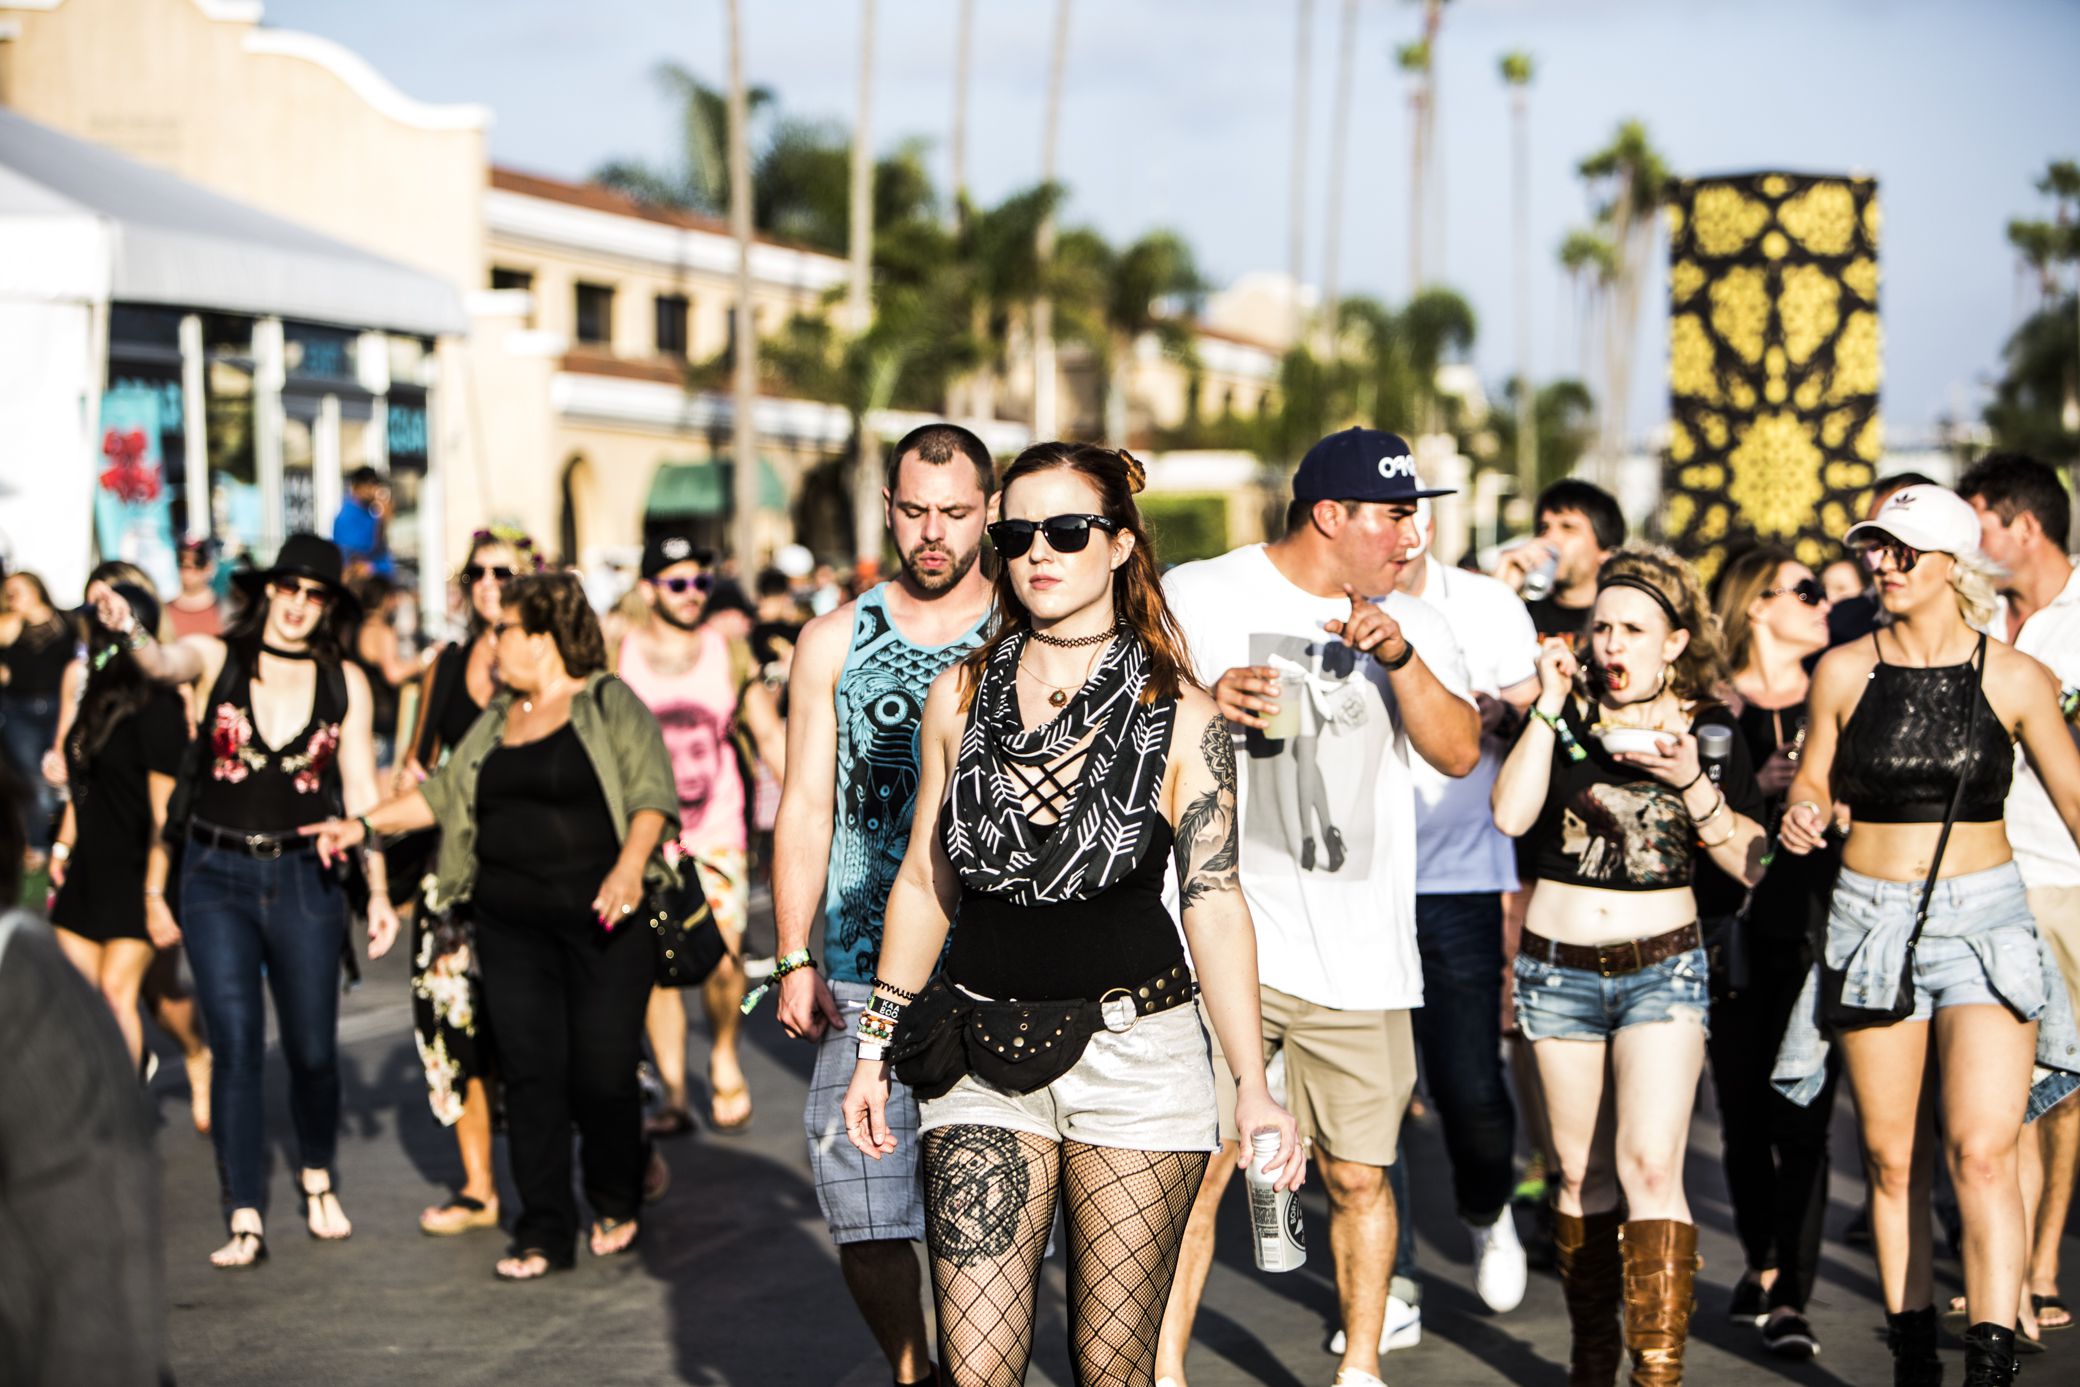 kaaboo 5 KAABOO Del Mar Succeeds at Being a Festival for Everyone